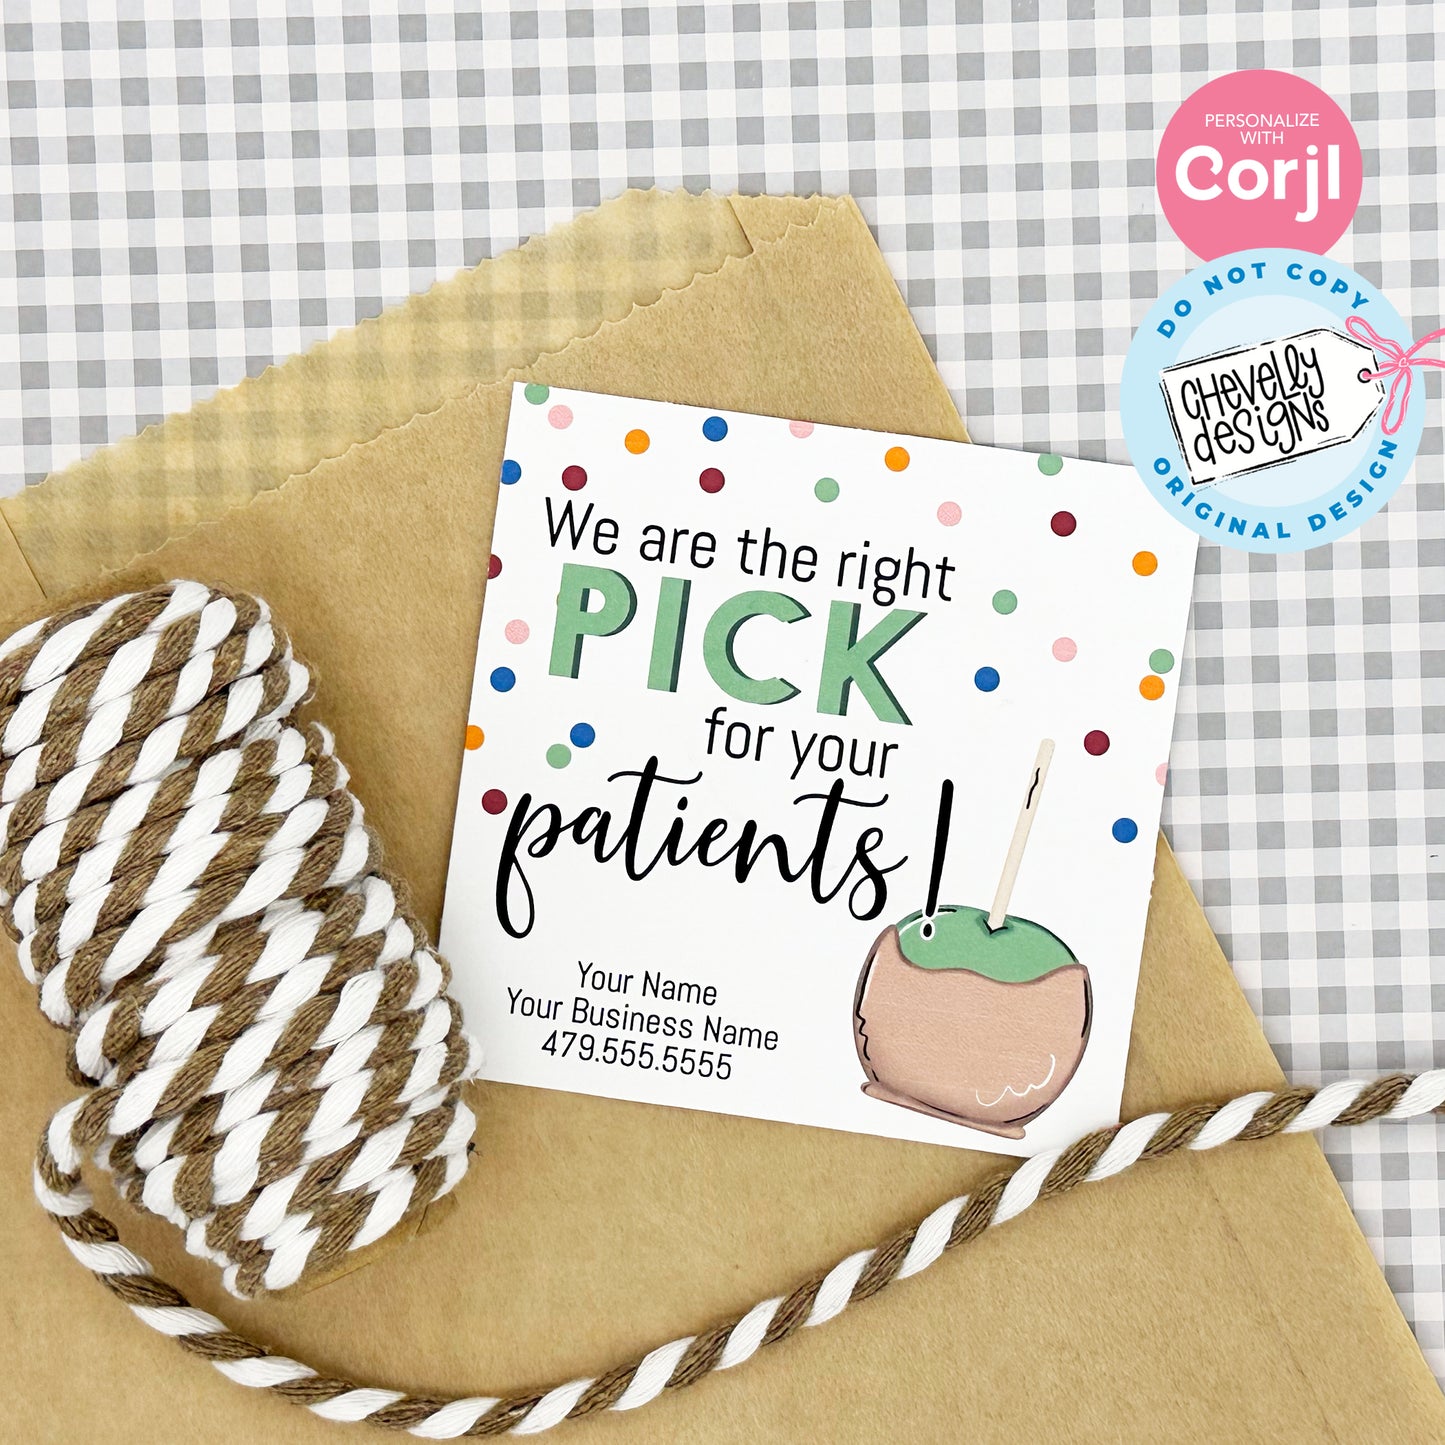 EDITABLE -  We Are The Right Pick For Your Patients - Caramel Apple Gift Tags - Business Referral Marketing - Printable Digital File